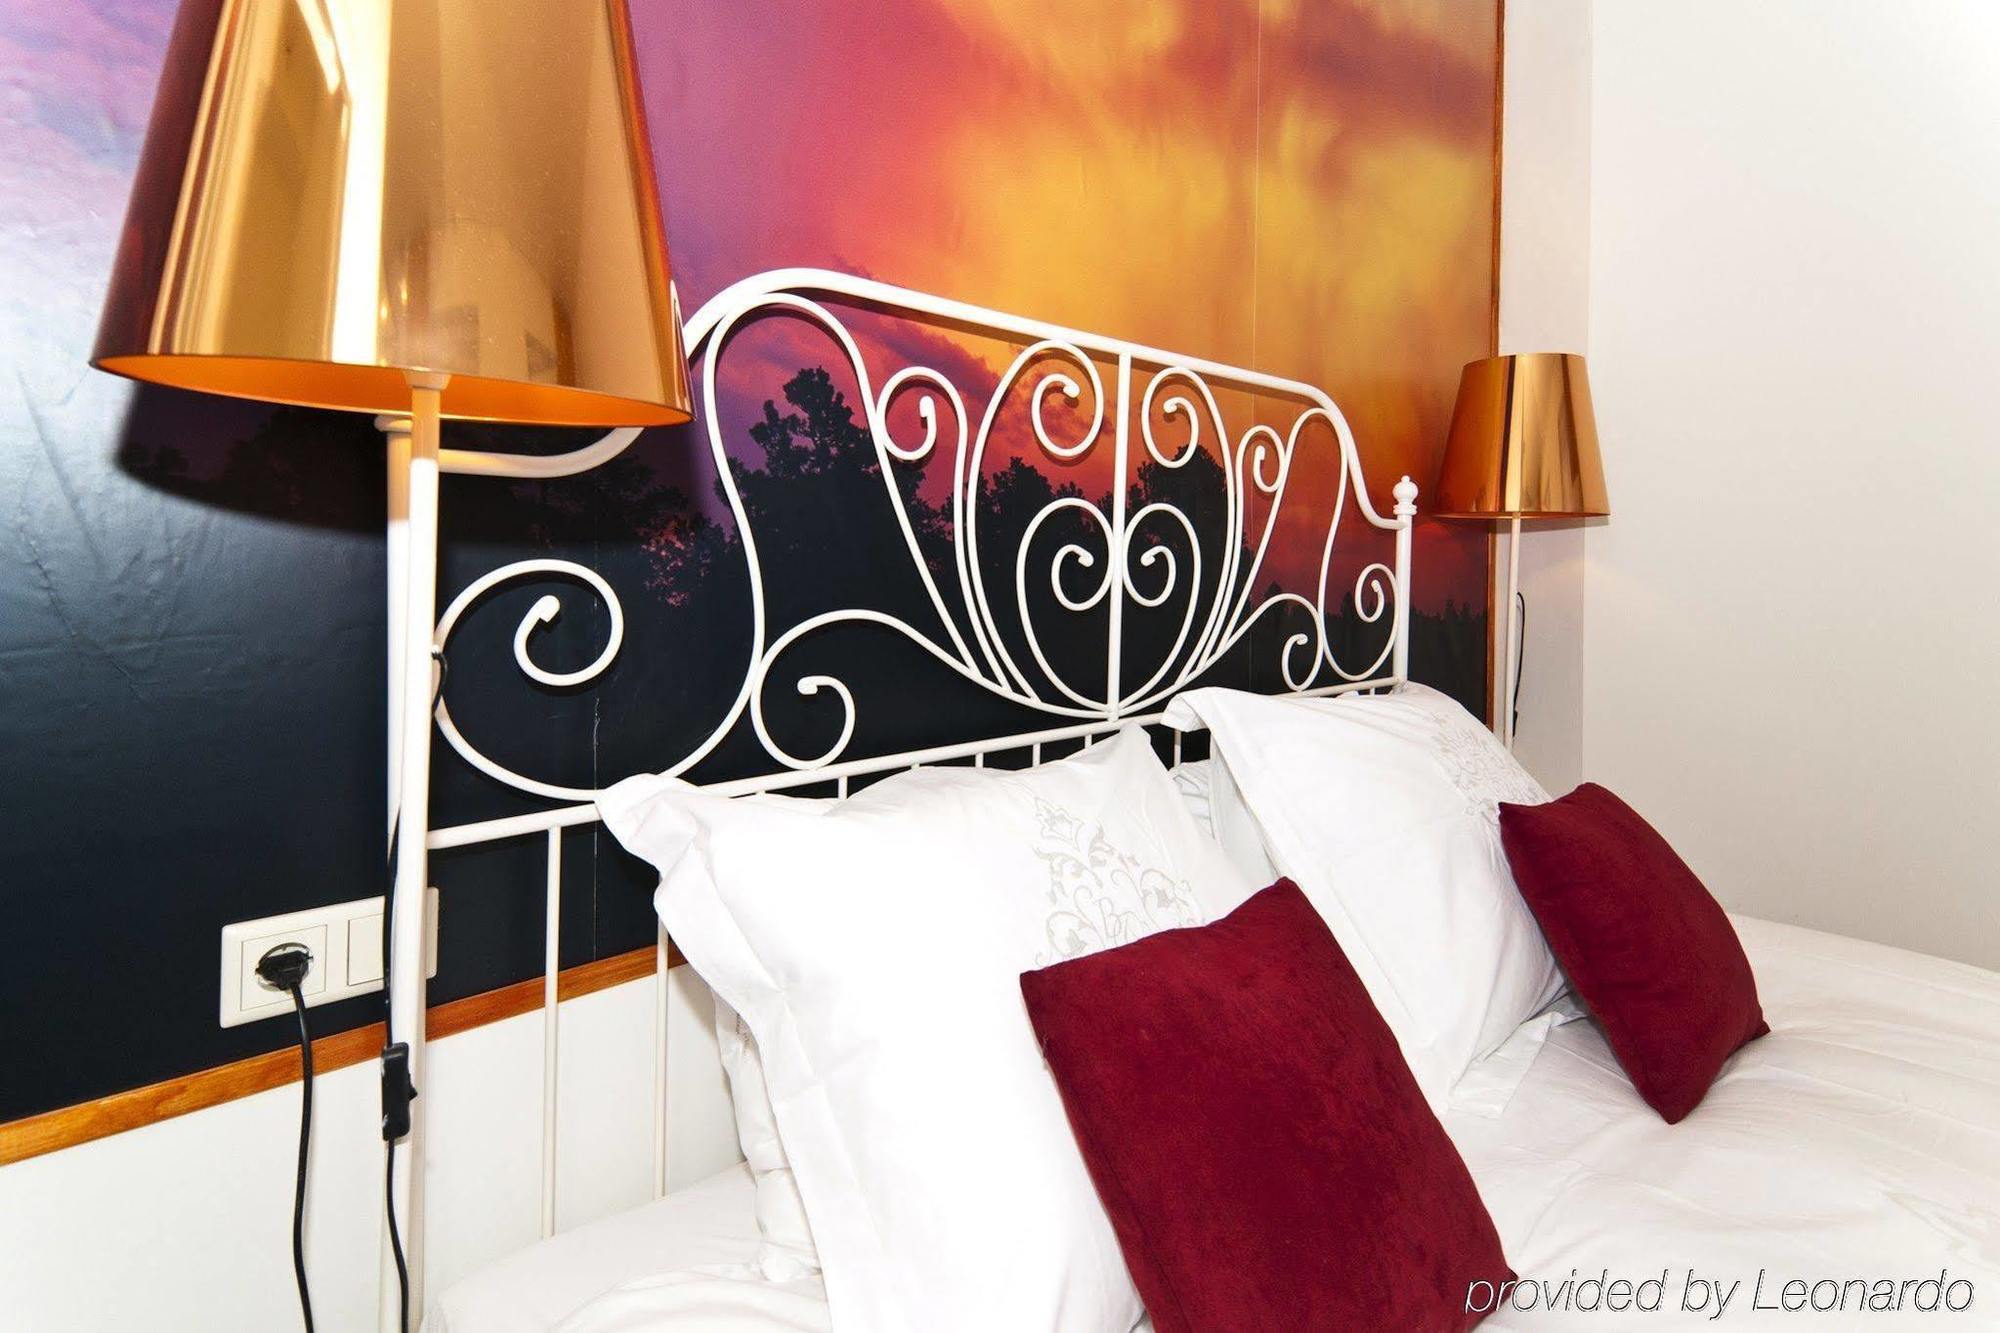 De Bedstee Boutique Capsules (Adults Only) Hotel Amsterdam Luaran gambar